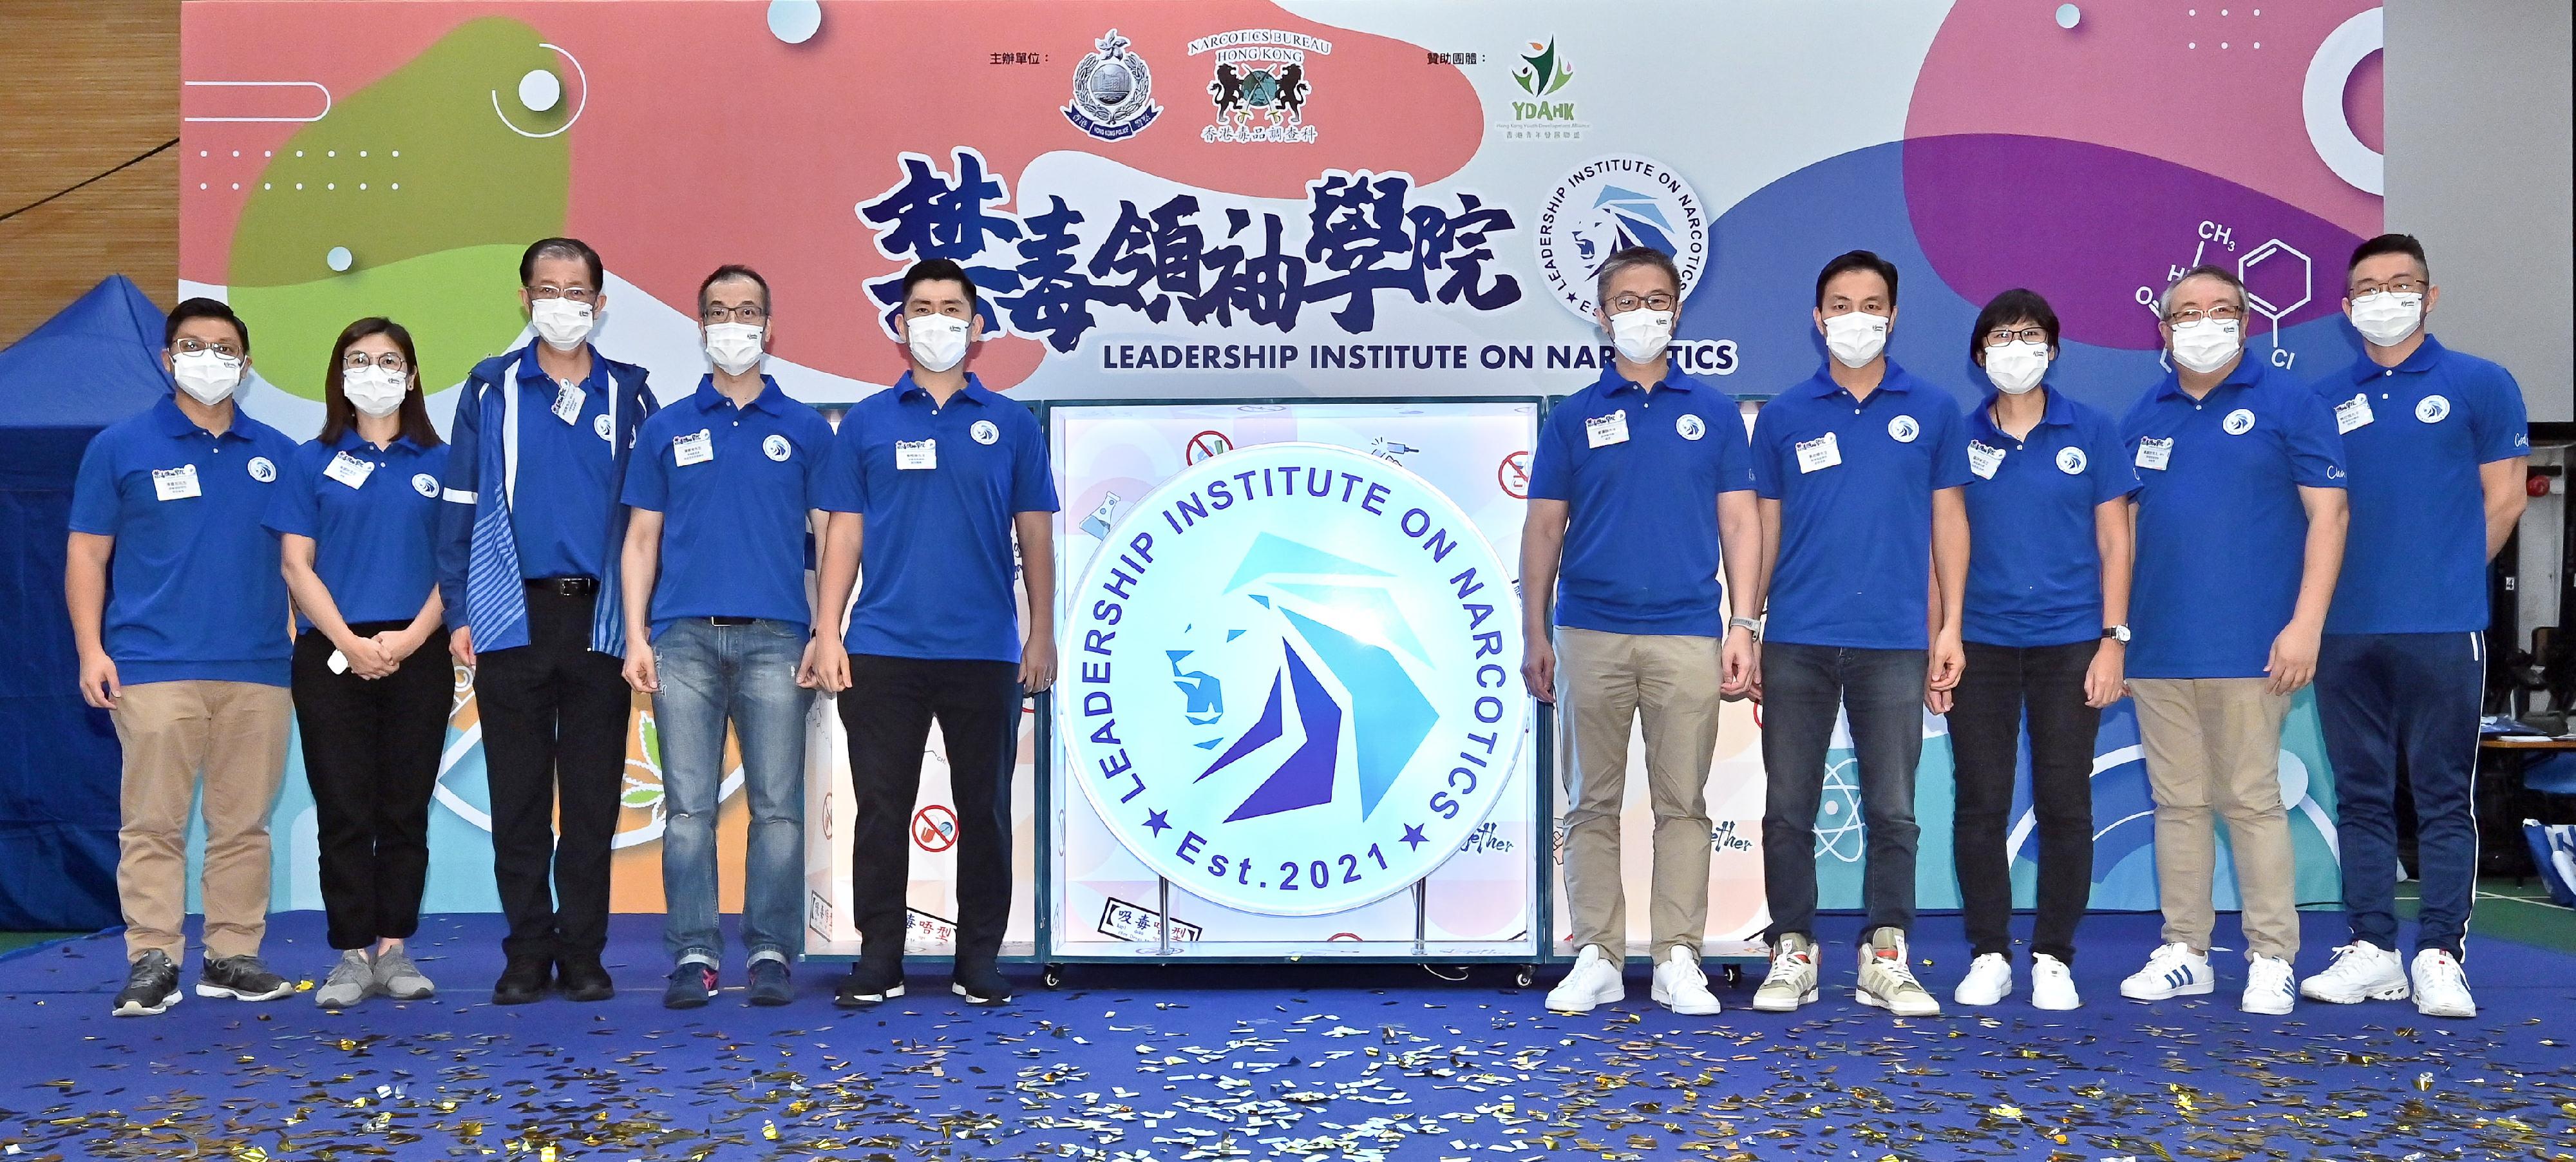 The Hong Kong Police Force today (June 11) launched a one-year anti-drug youth leadership development programme, "Leadership Institute on Narcotics" ("L.I.O.N."). Photo shows (from left) Executive Committee Member of "L.I.O.N", Mr Barry Cheung; the Chief Superintendent of Narcotics Bureau, Ms Ng Wing-sze; the Executive President of "L.I.O.N", Mr Henry Tong; the Director of Crime and Security, Mr Yip Wan-lung; the Chairman of Hong Kong Youth Development Alliance, Mr Lau Kan-sum; the Commissioner of Police, Mr Siu Chak-yee; the Chief President of "L.I.O.N", Mr Leslie Choy; the Assistant Commissioner of Police (Crime), Ms Chung Wing-man; Vice-presidents of "L.I.O.N", Mr Kerry Wong and Mr Godfrey Ngai, officiating at the kick-off ceremony.